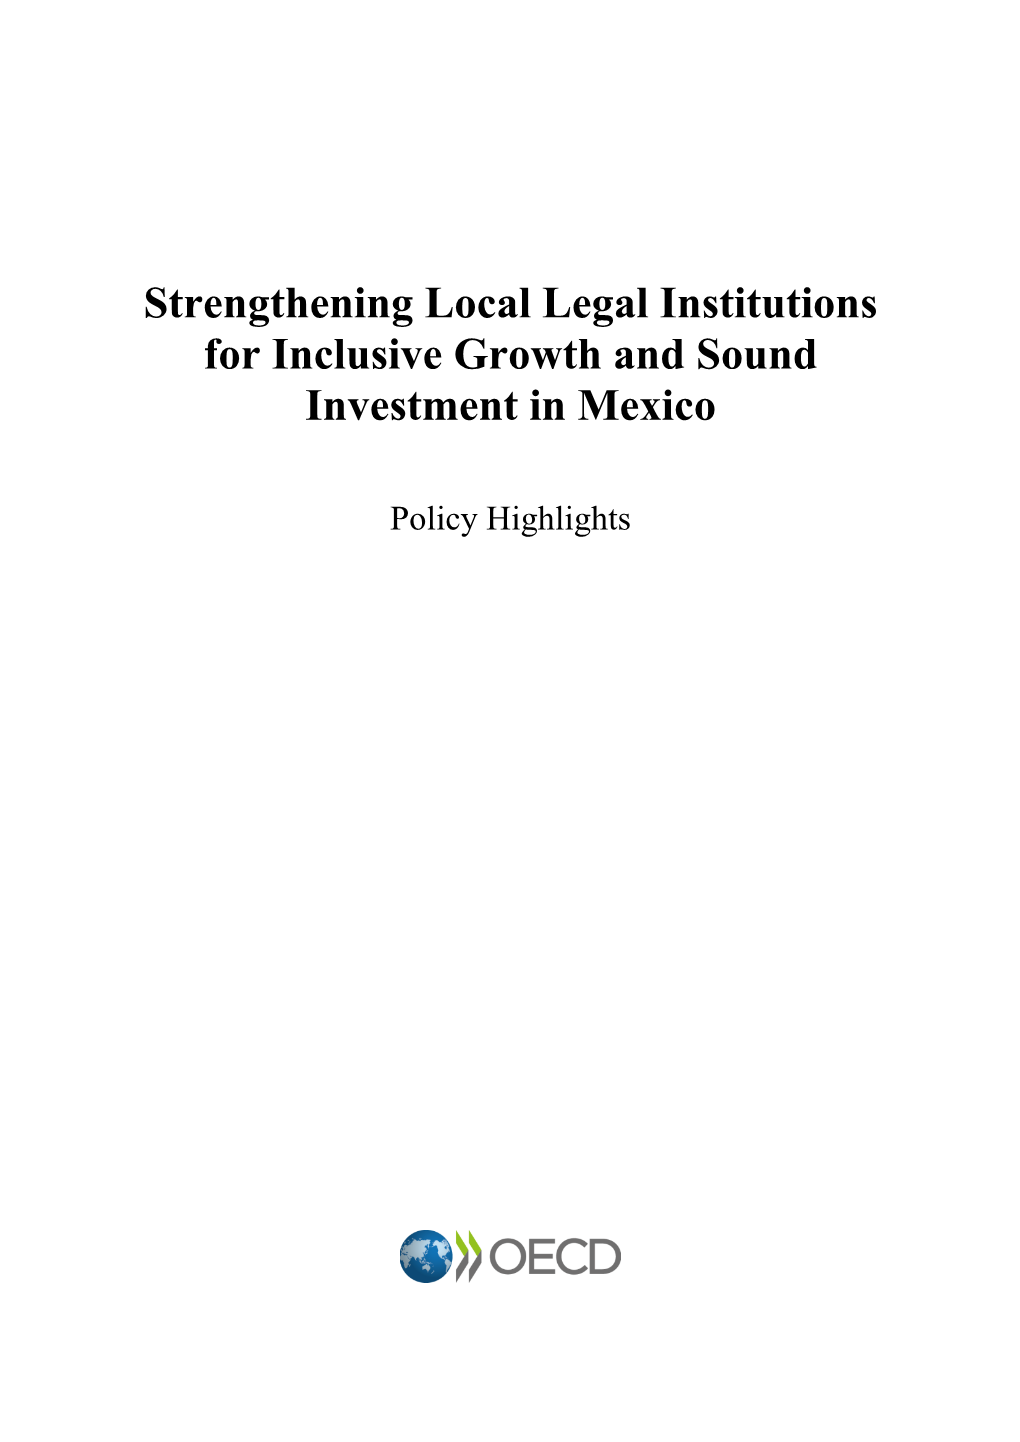 Strengthening Local Legal Institutions for Inclusive Growth and Sound Investment in Mexico